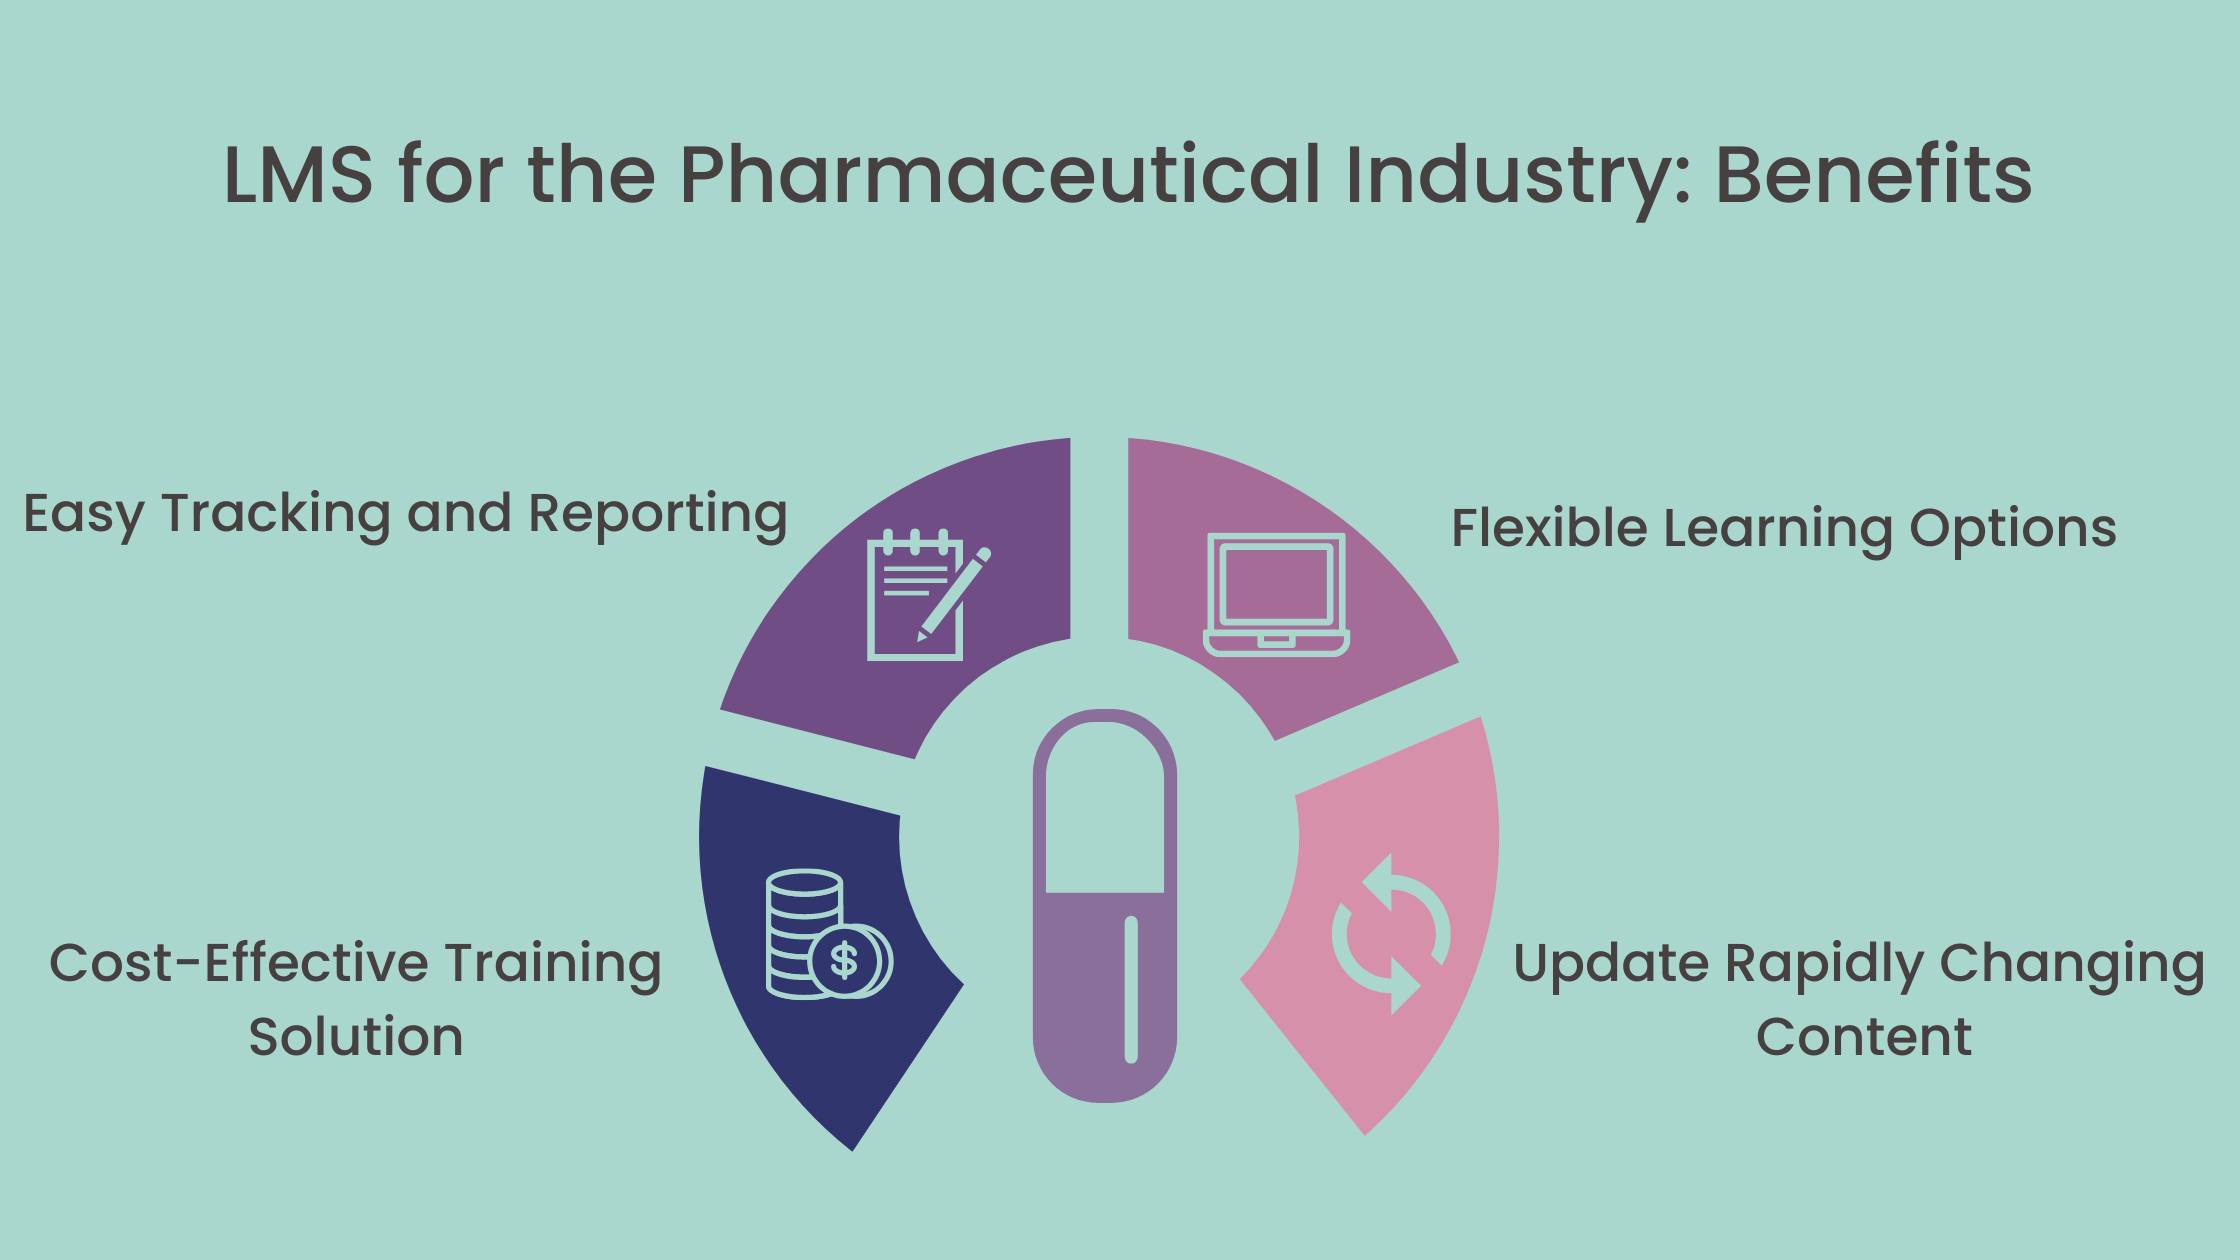 LMS for the Pharmaceutical Industry: Benefits